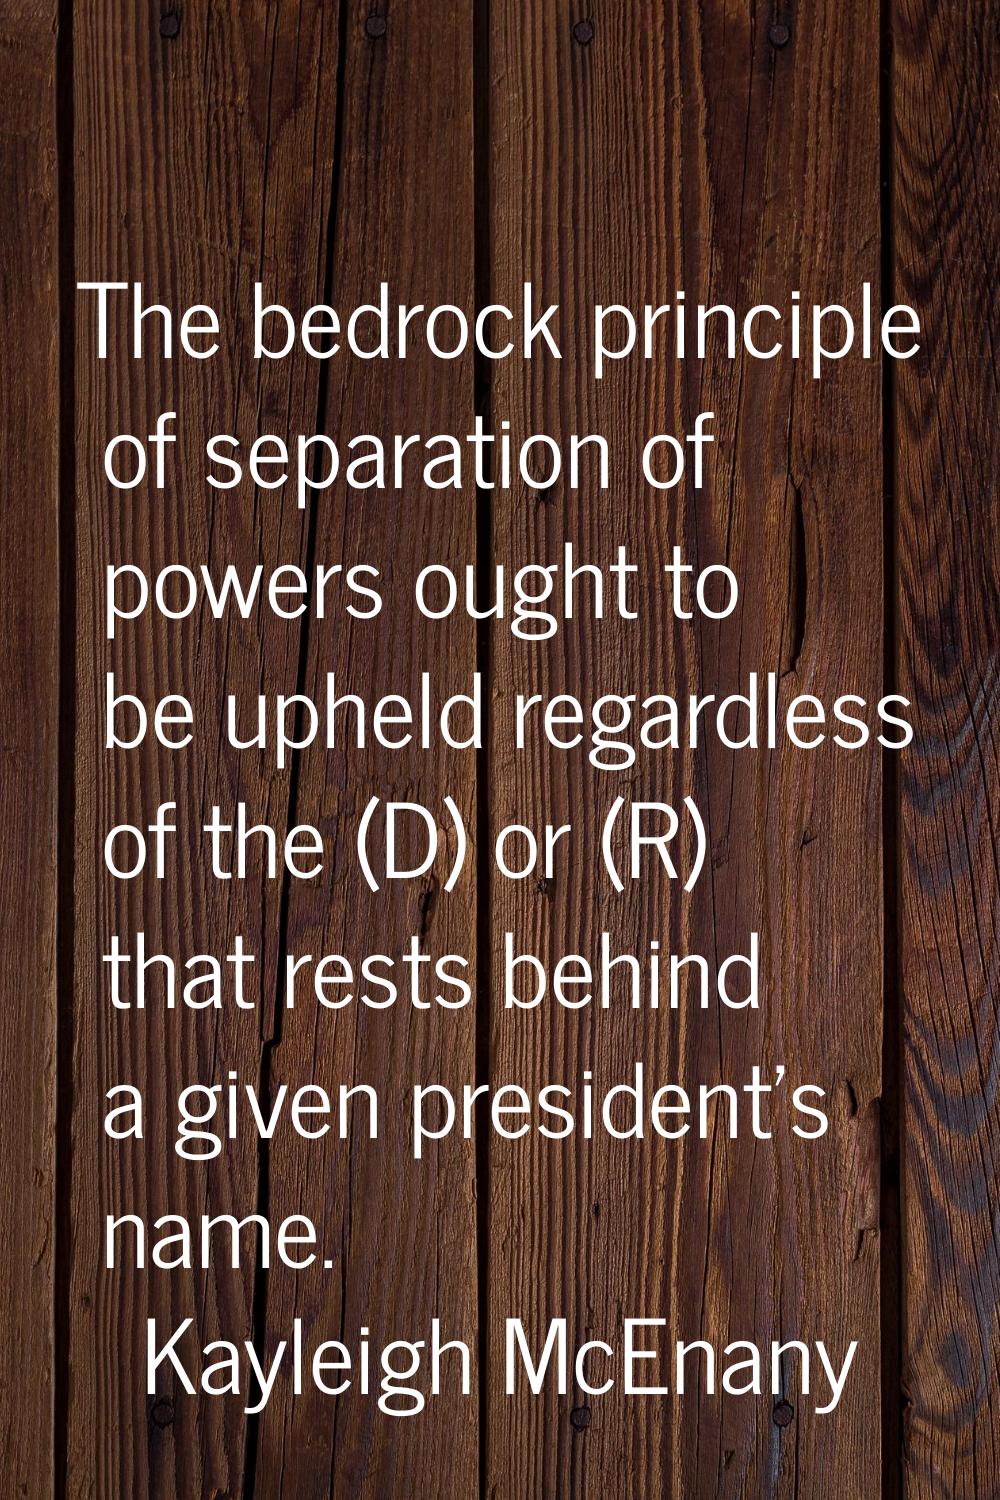 The bedrock principle of separation of powers ought to be upheld regardless of the (D) or (R) that 